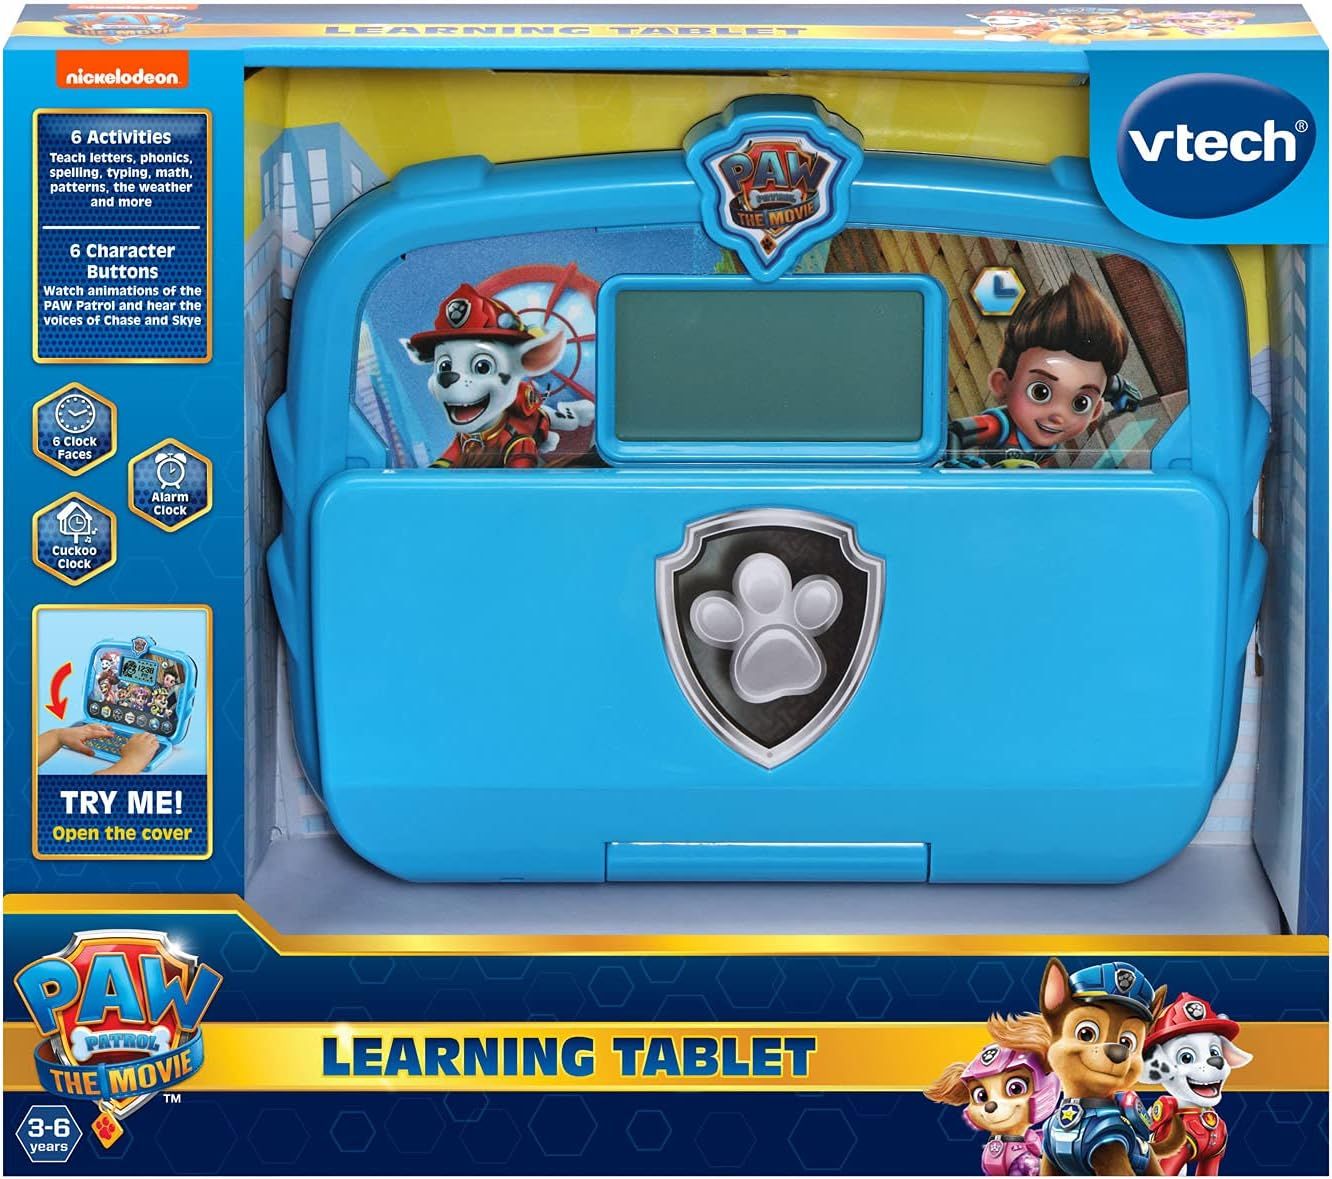 Vtech Magic Adventures Globe, Tablets & Software, Baby & Toys